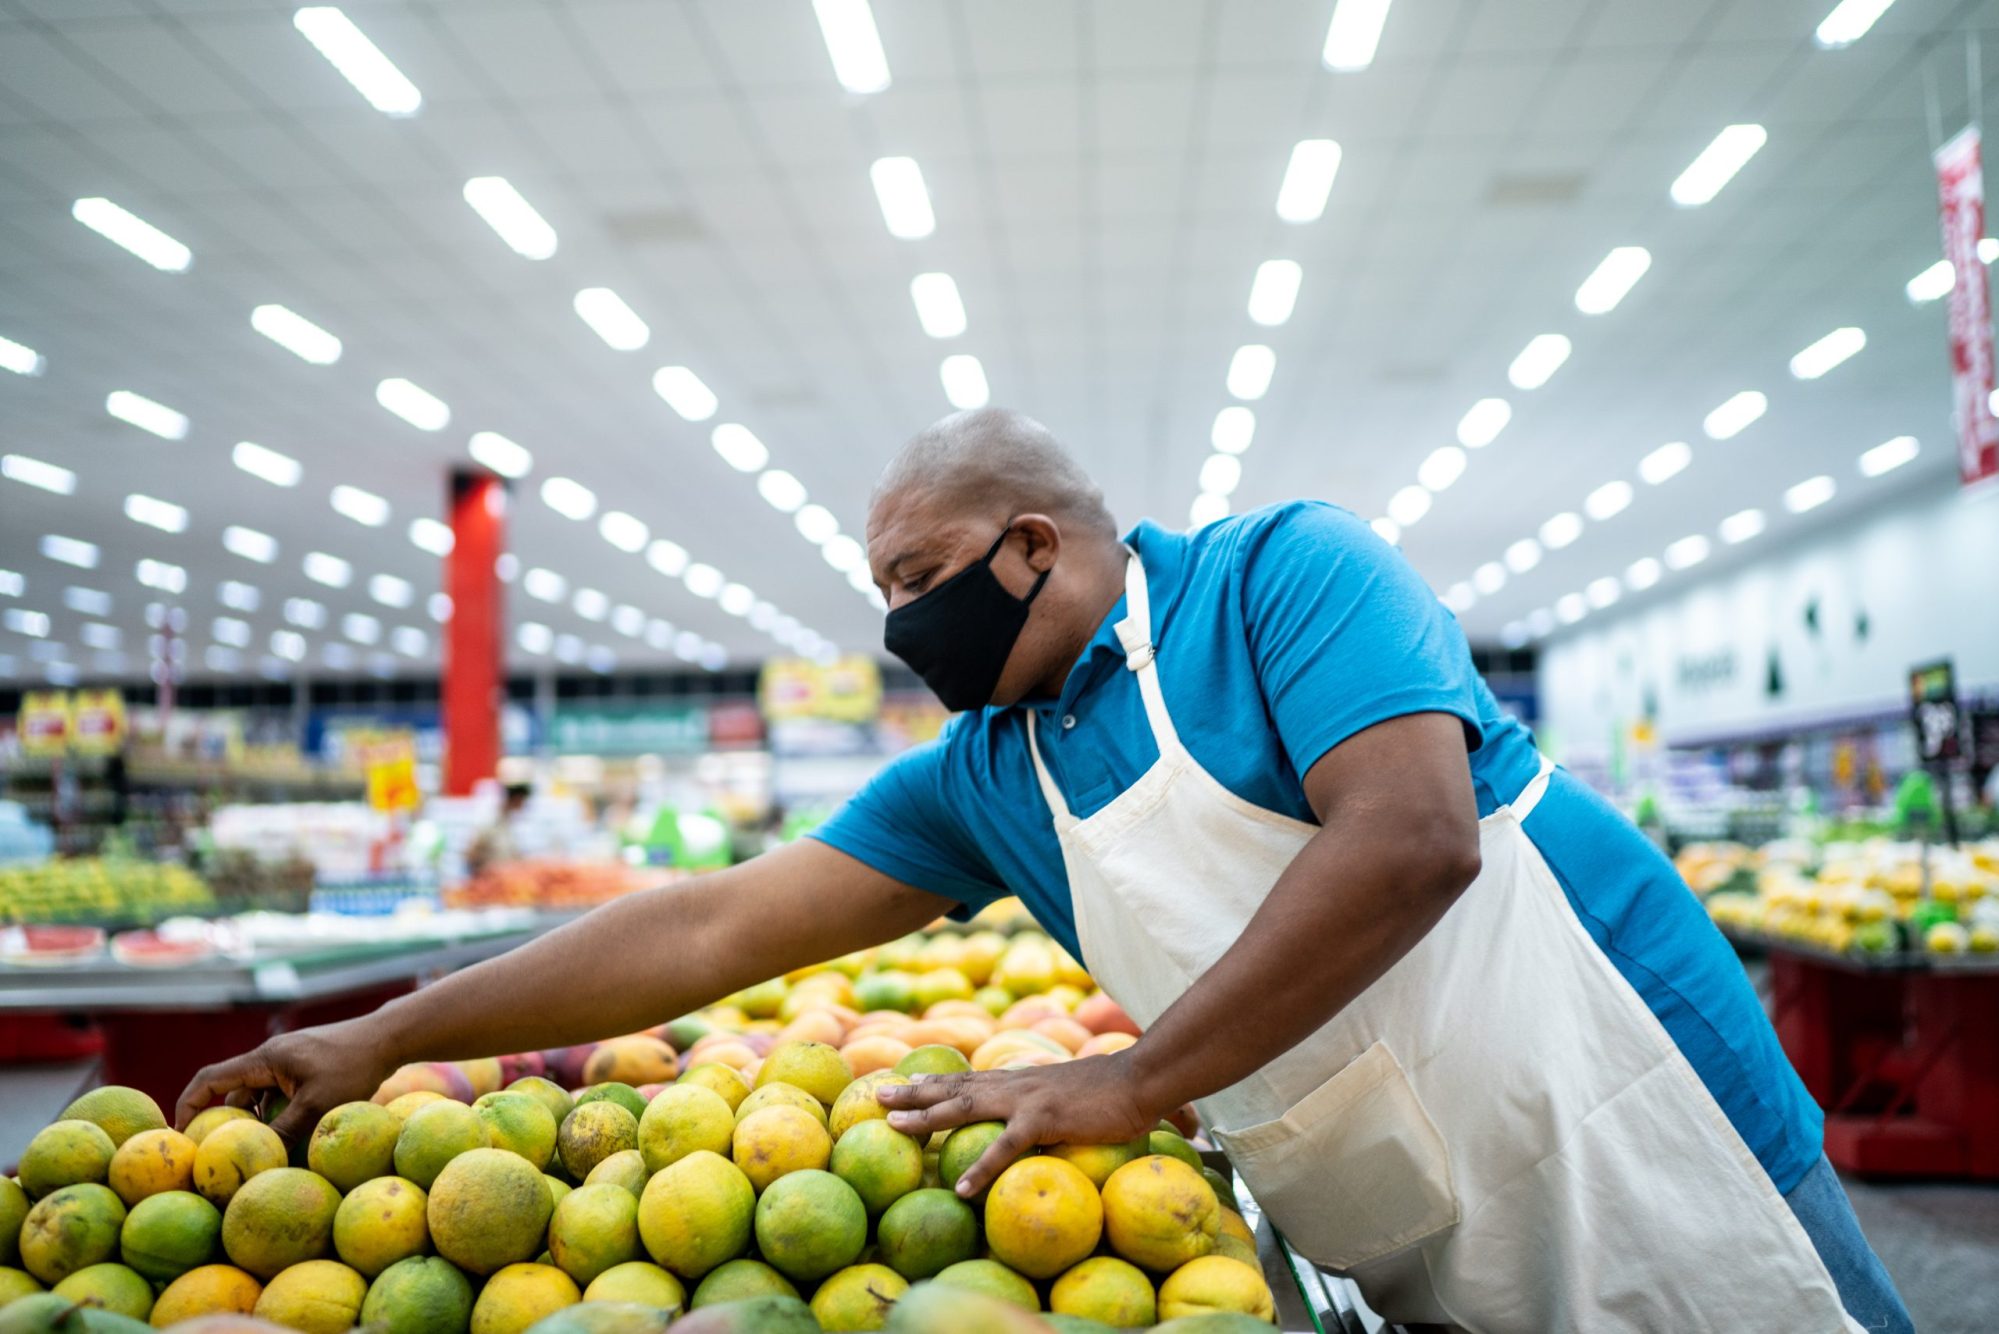 Man wearing face mask working arranging fruits in a supermarket